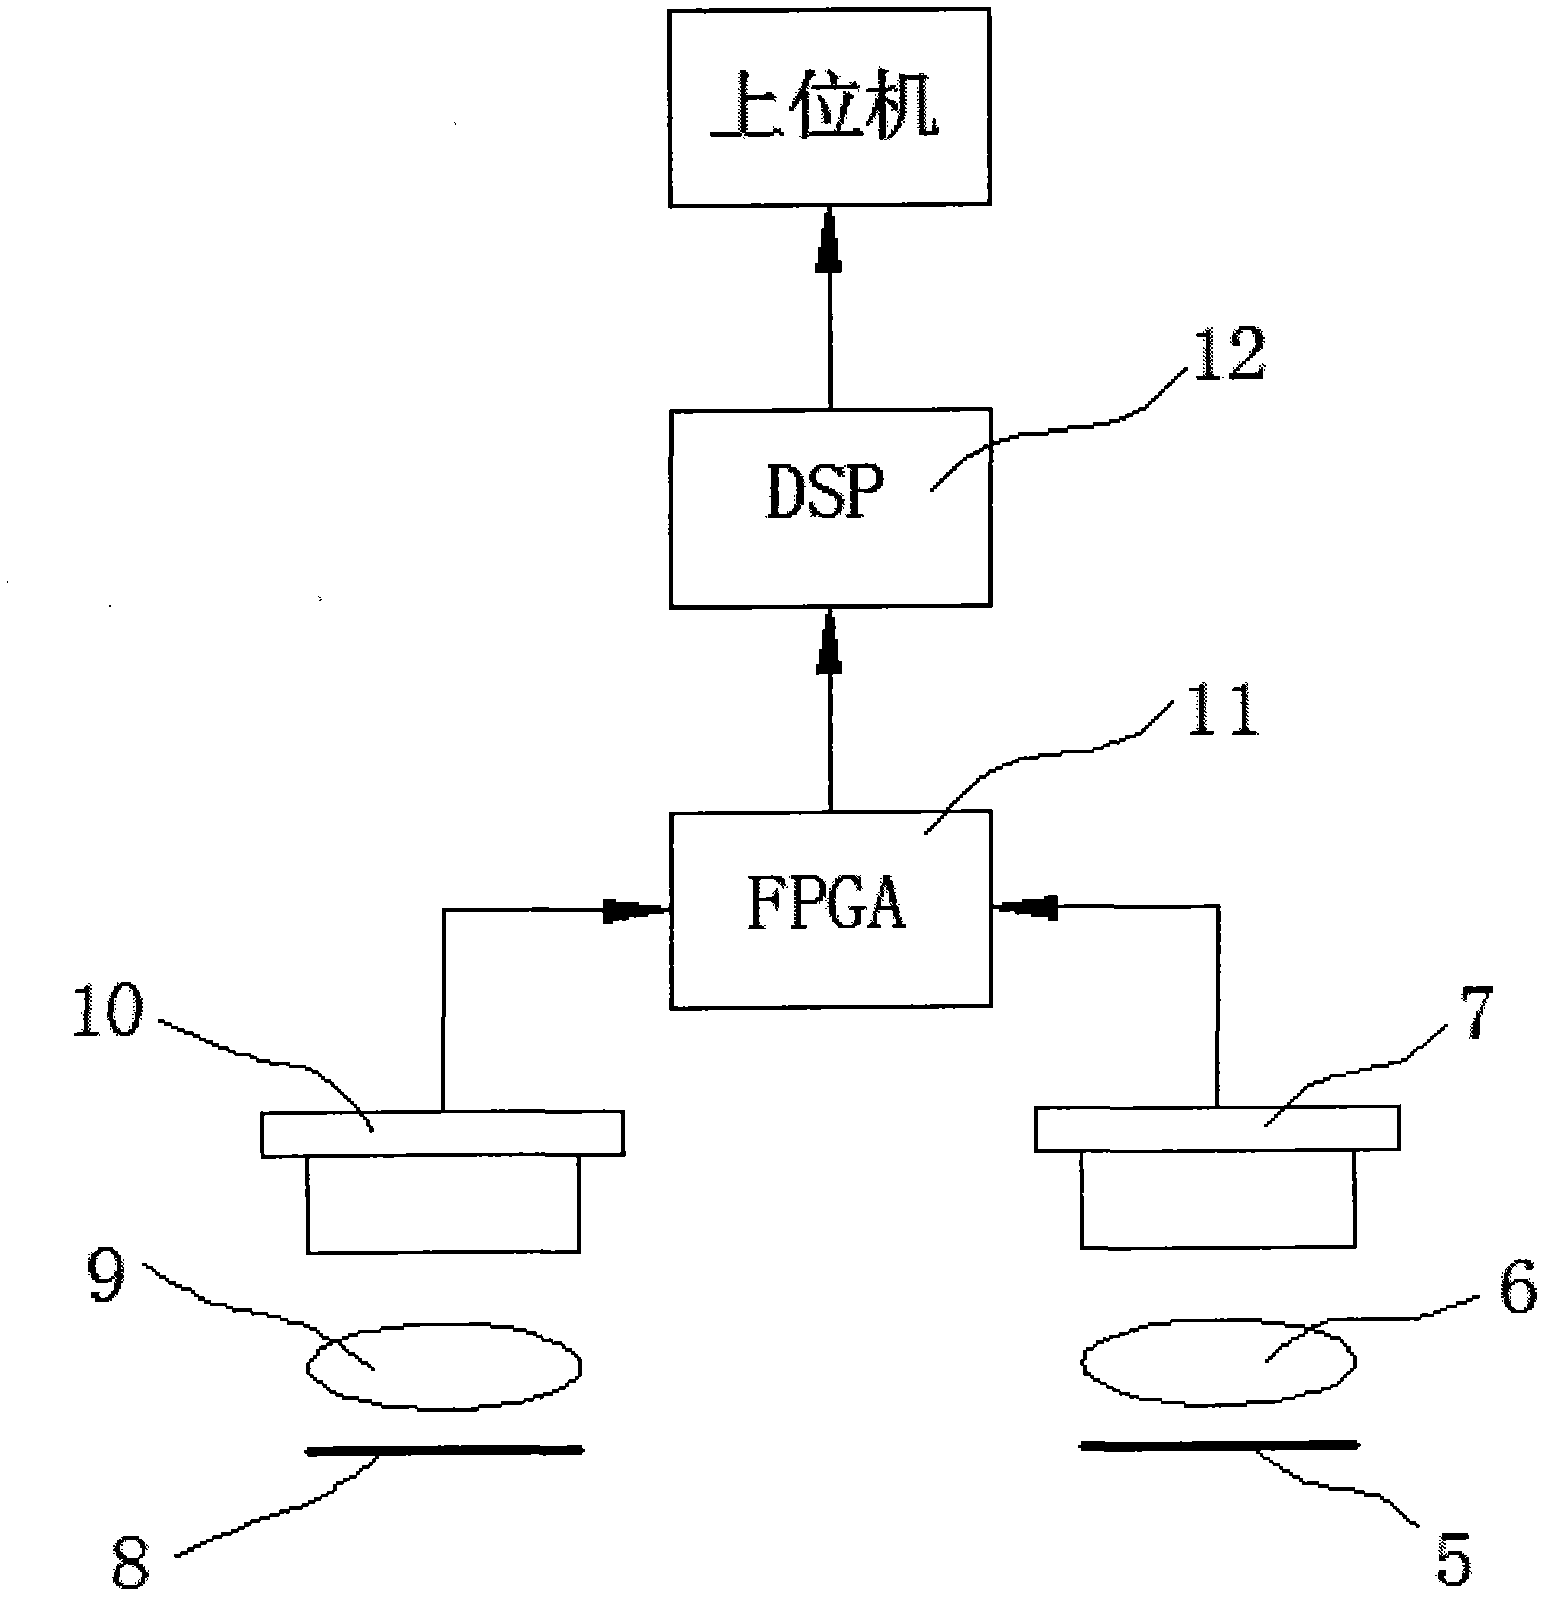 Active infrared action identifying method